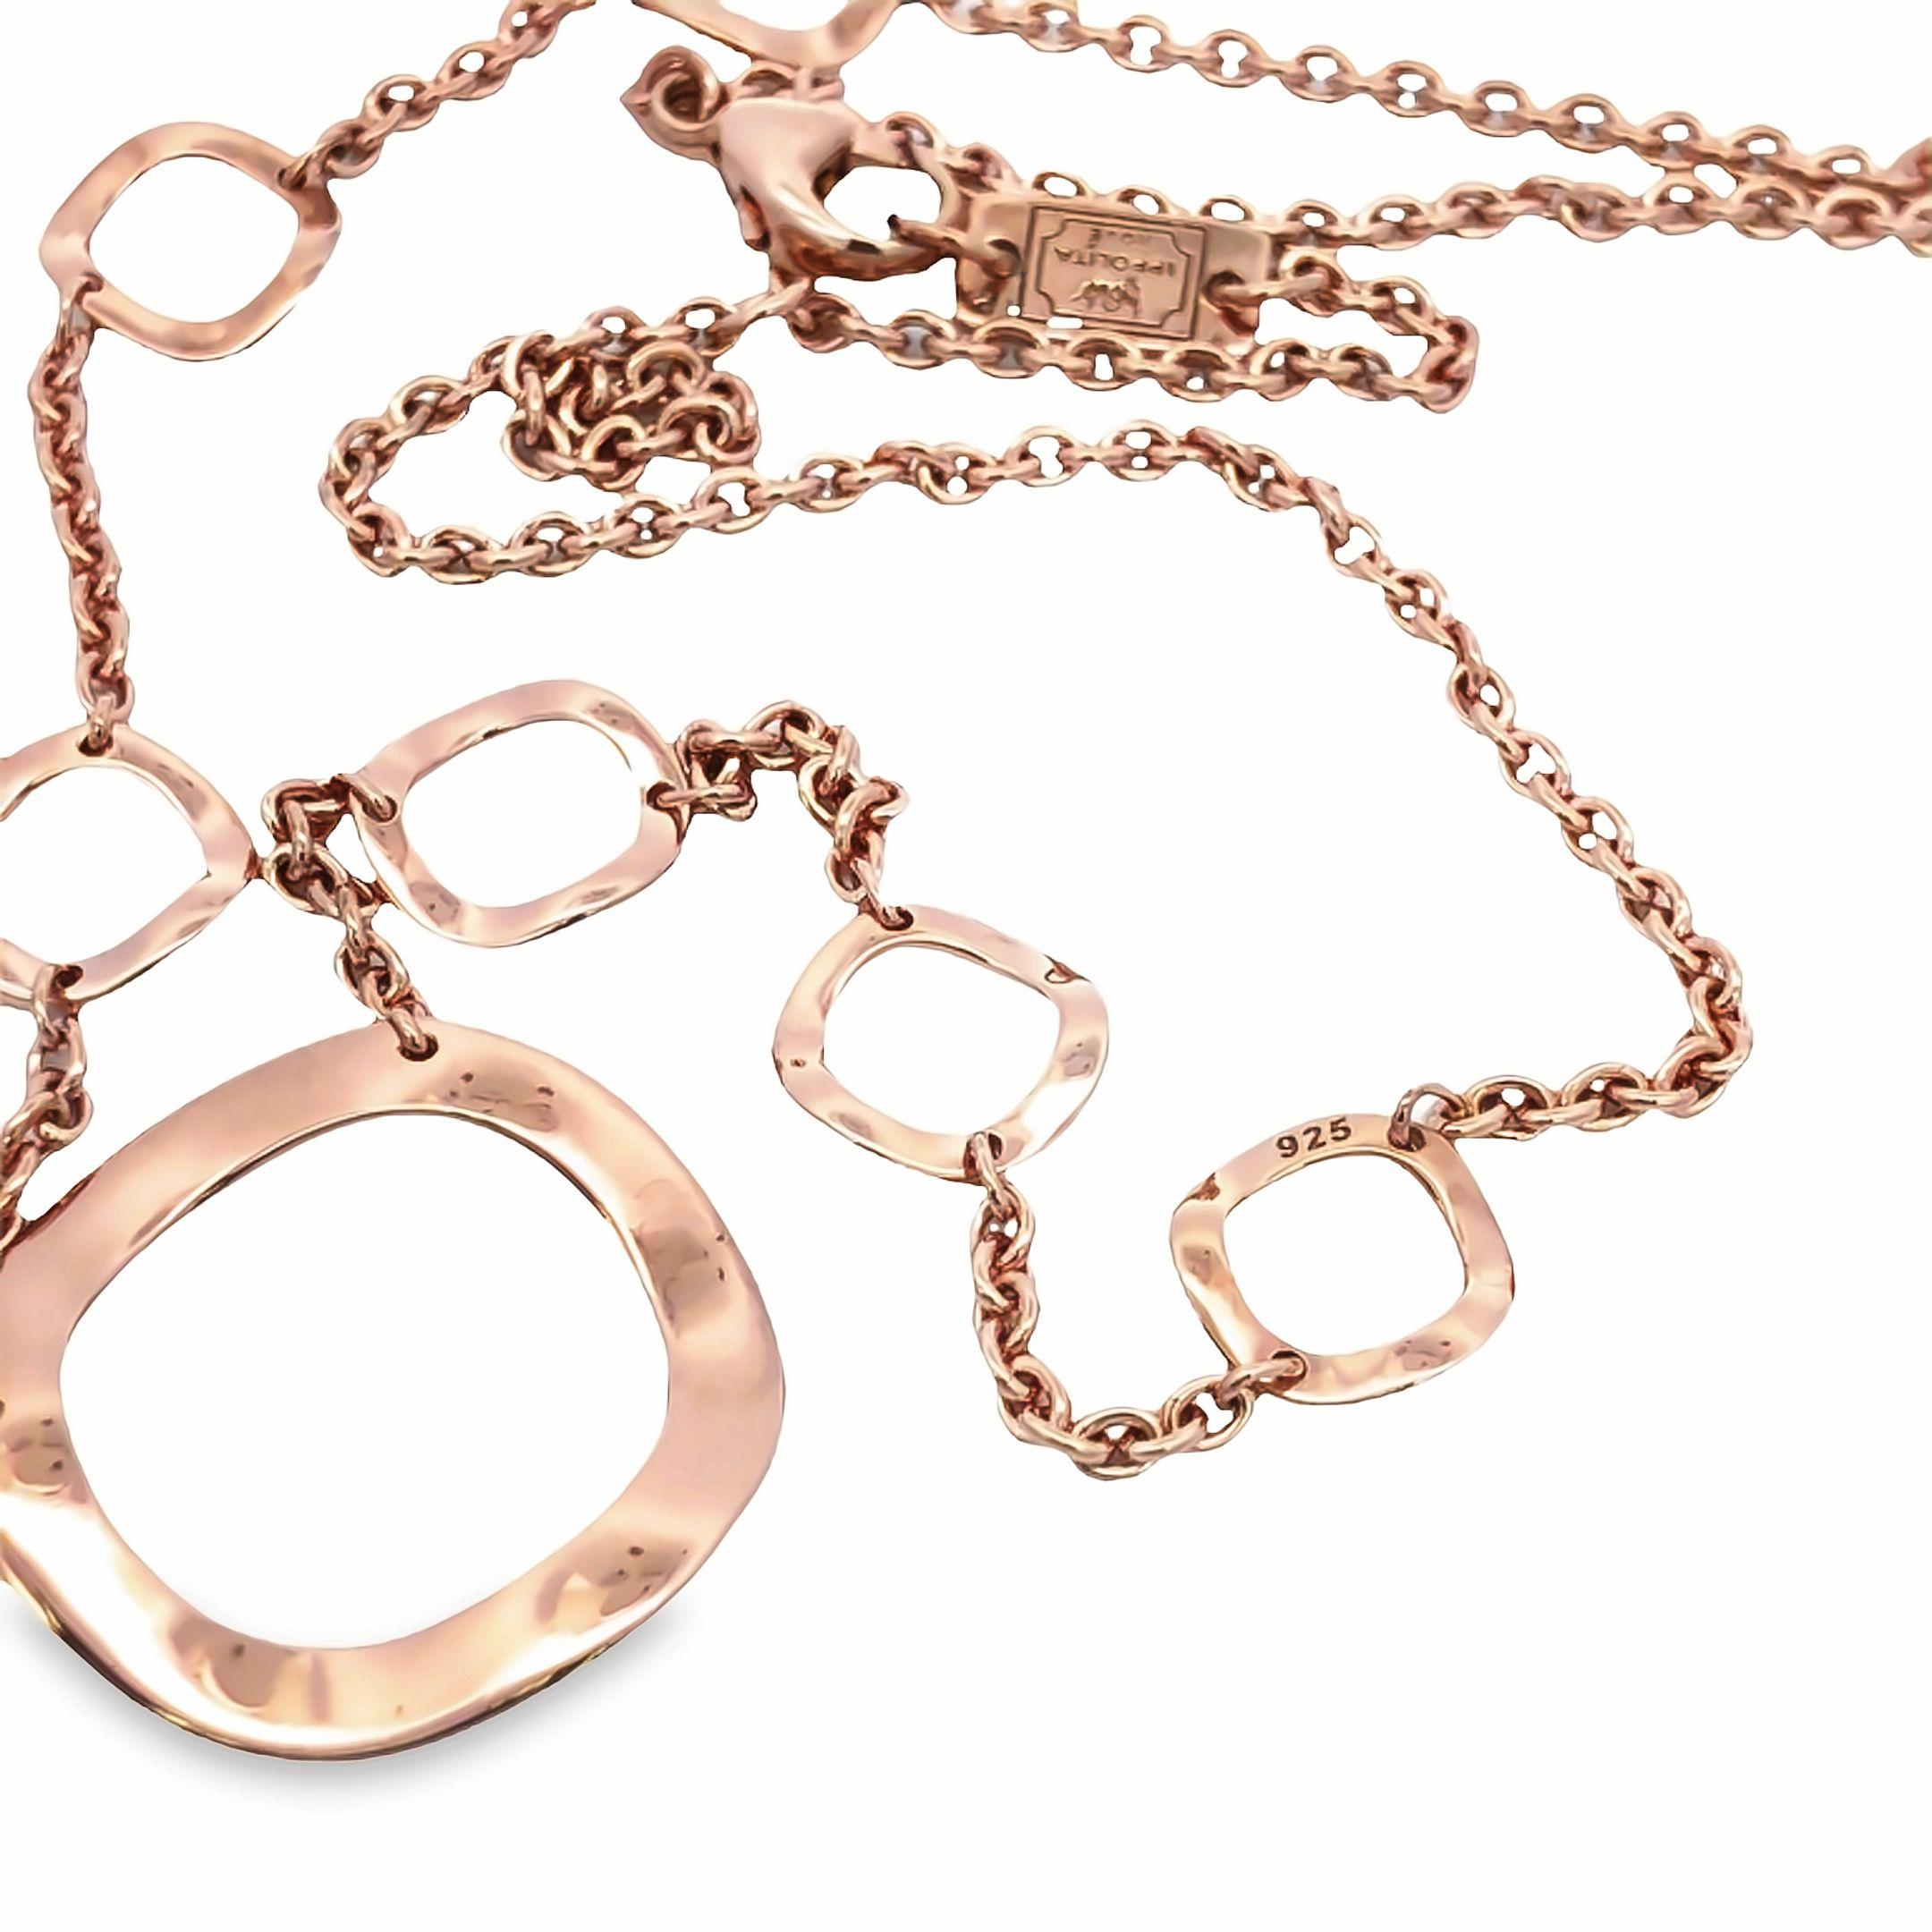 Flat hoop necklace designed by IPPOLITA finely crafted rose gold vermeil sitting on top of sterling silver featuring a total of 7 squiggle design hoops. Necklace measures 18 inches long and measure 0.7mm wide with posts and butterfly backs. Fully